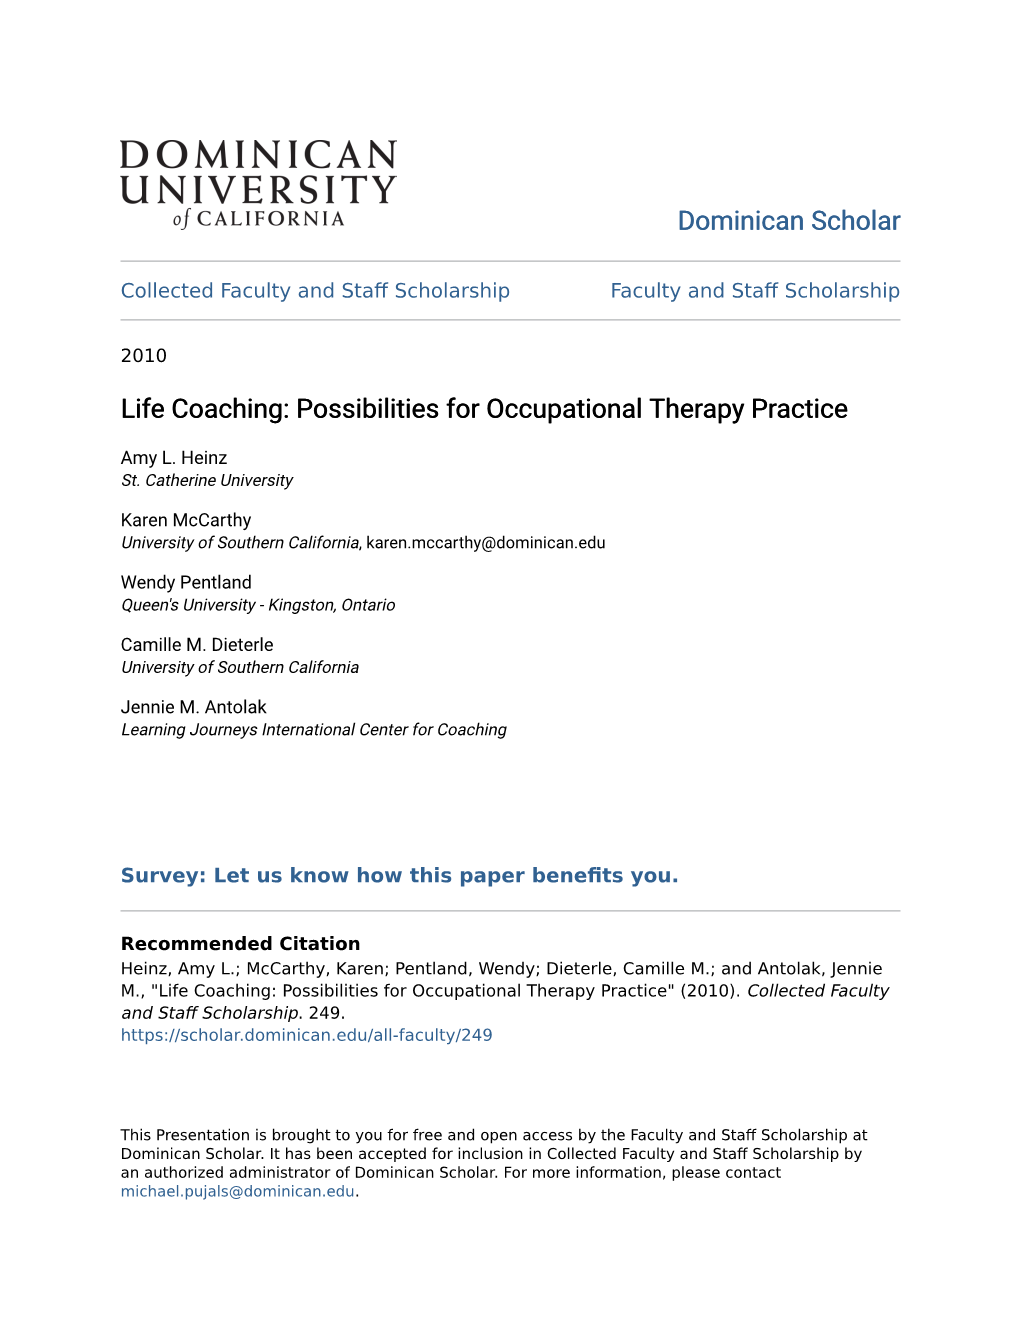 Life Coaching: Possibilities for Occupational Therapy Practice